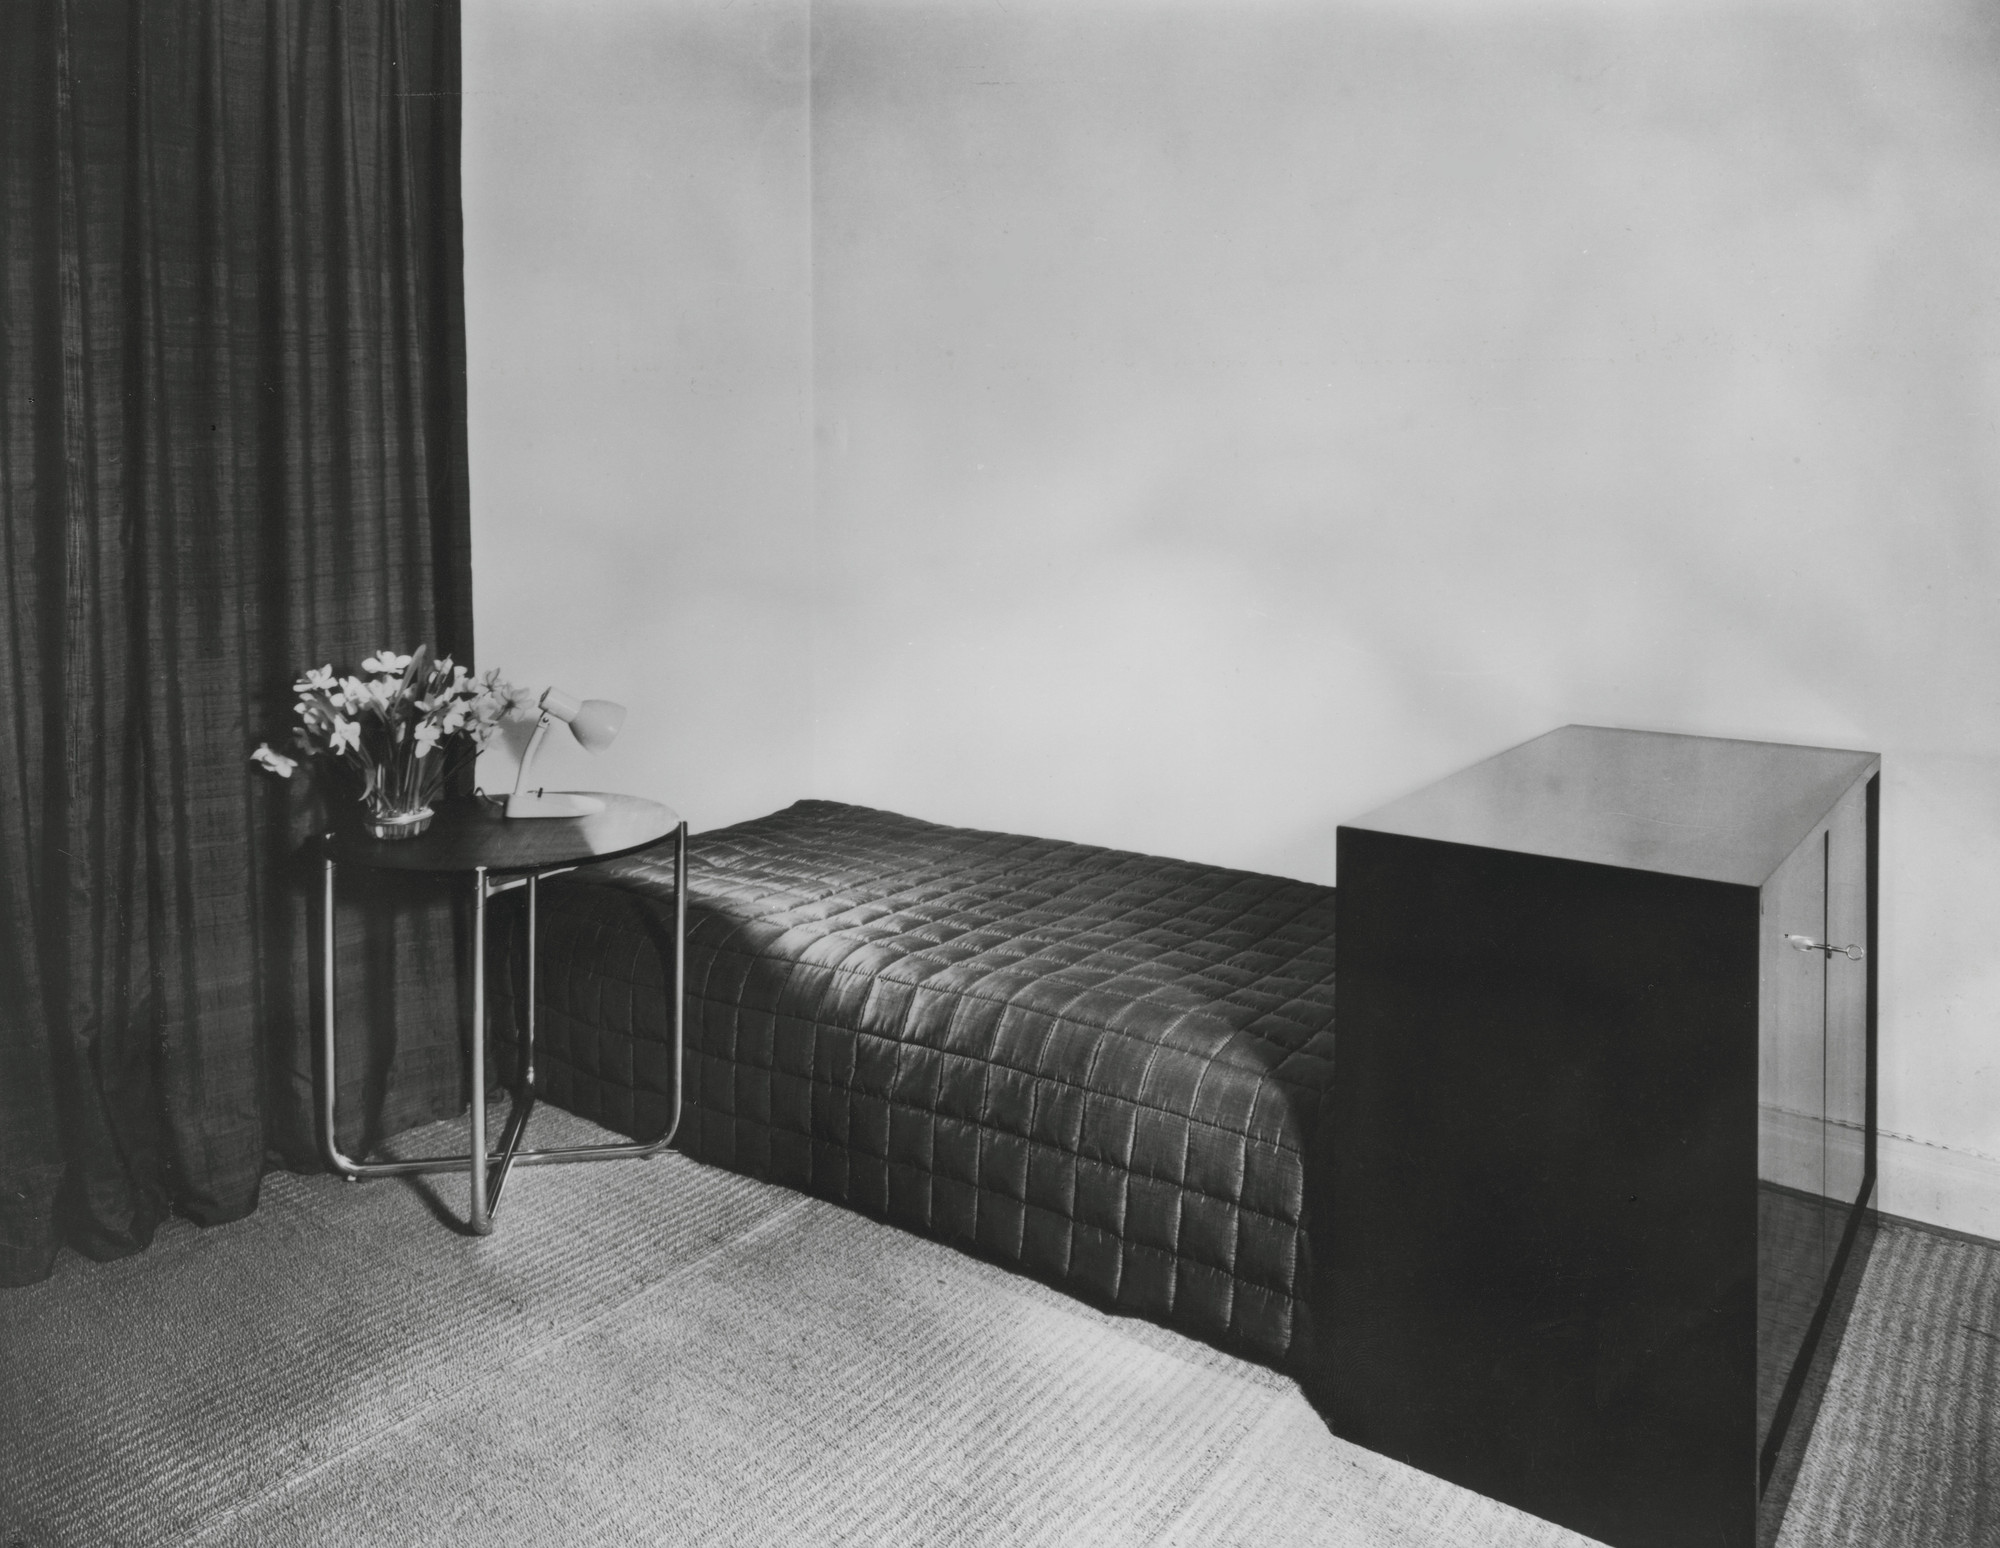 *Resolutely Modern, a Bachelor’s Bedroom*, 424 East 52nd St, New York